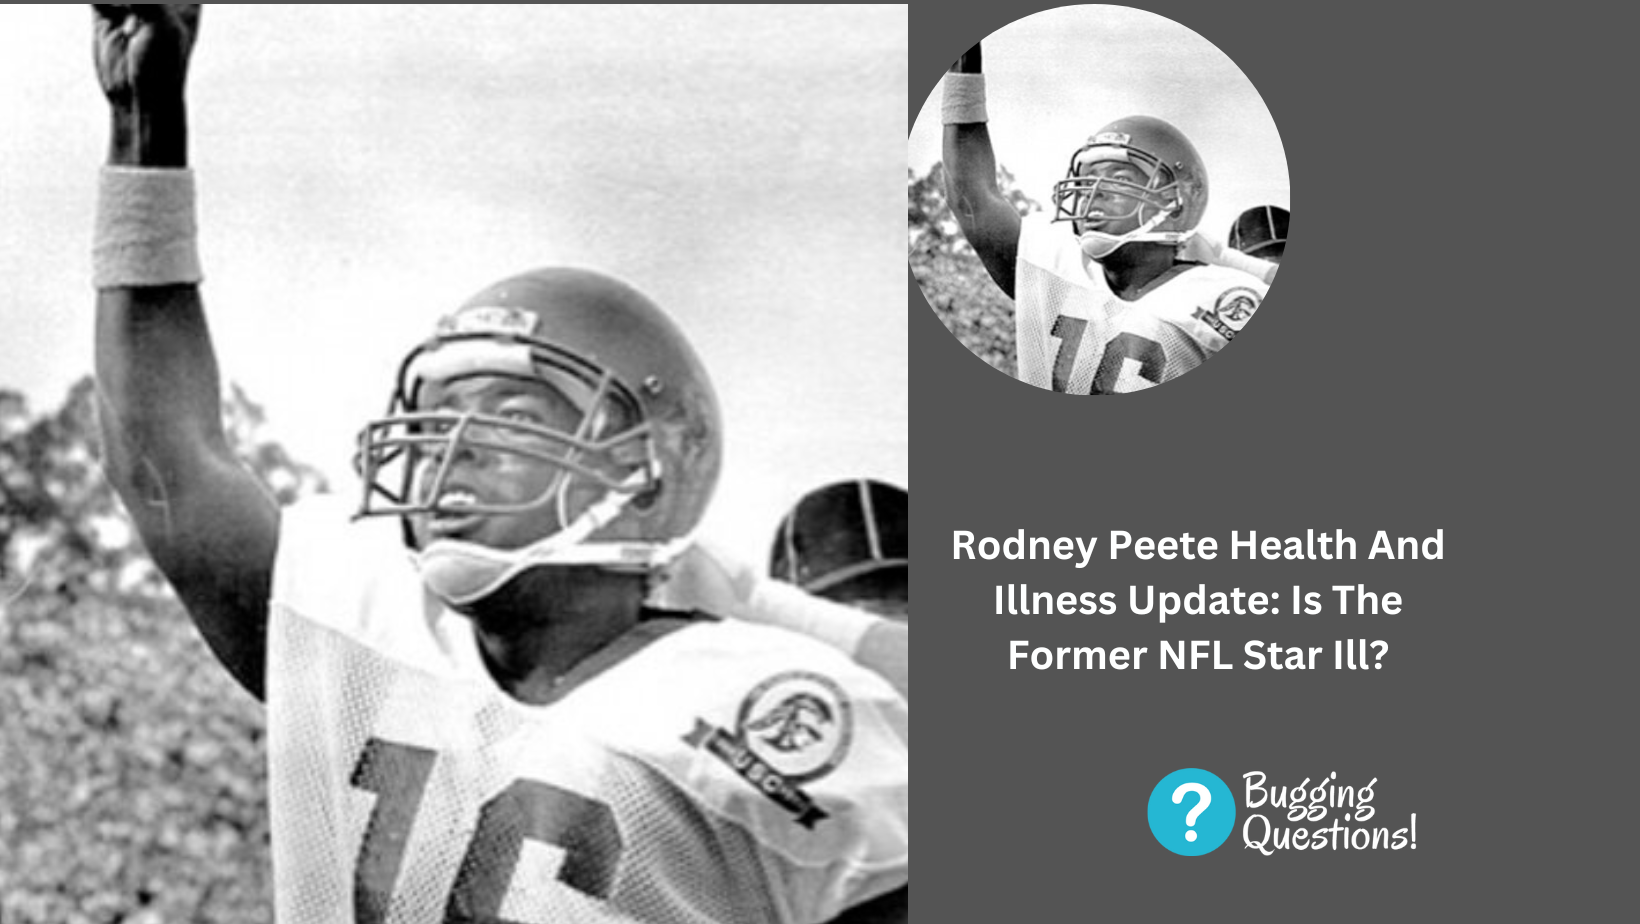 Rodney Peete Health And Illness Update: Is The Former NFL Star Ill?